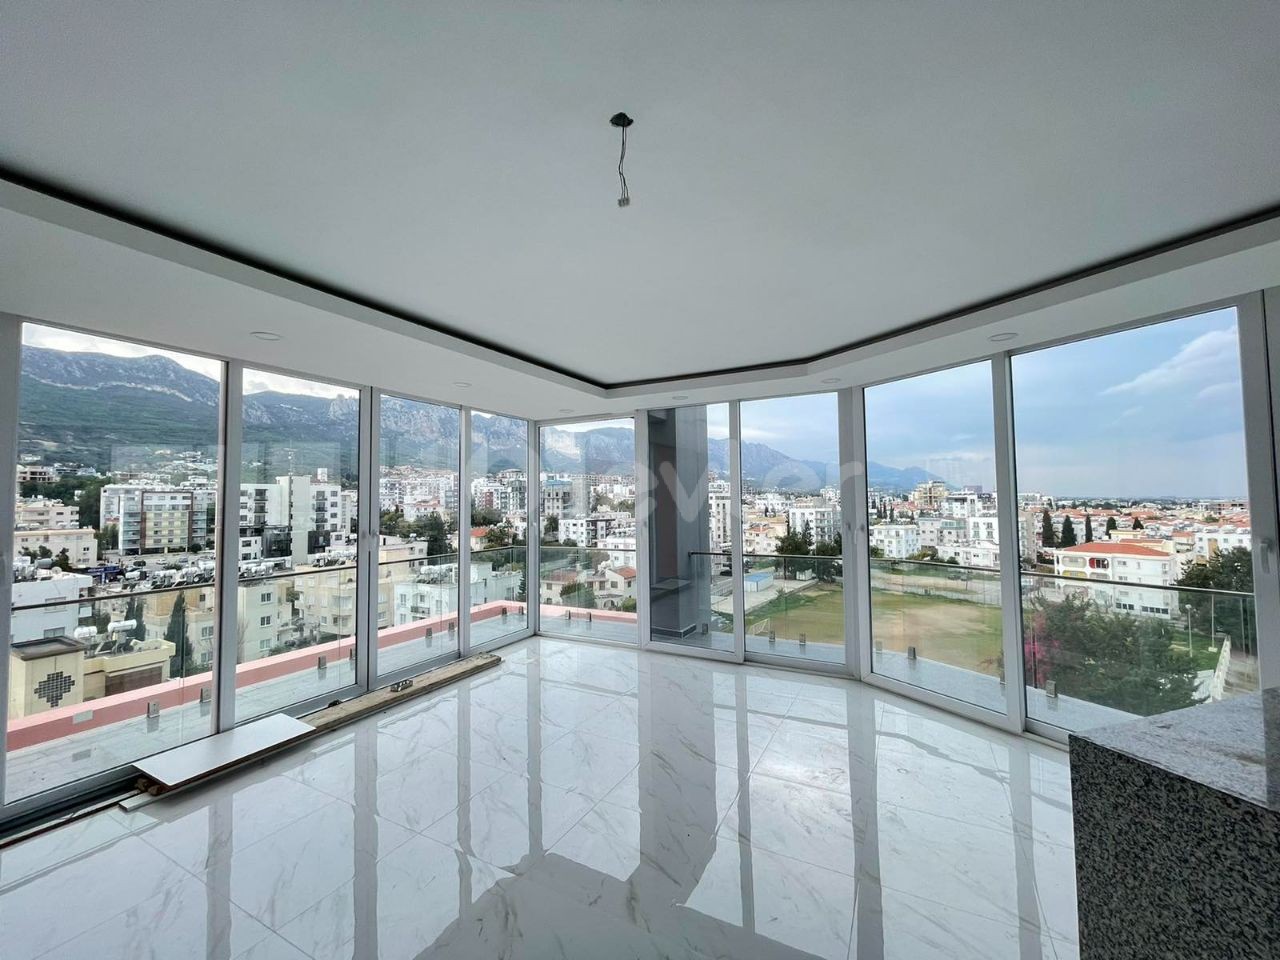 Sale! Duplex penthouse in the Center of Girne, sea and mountain views!